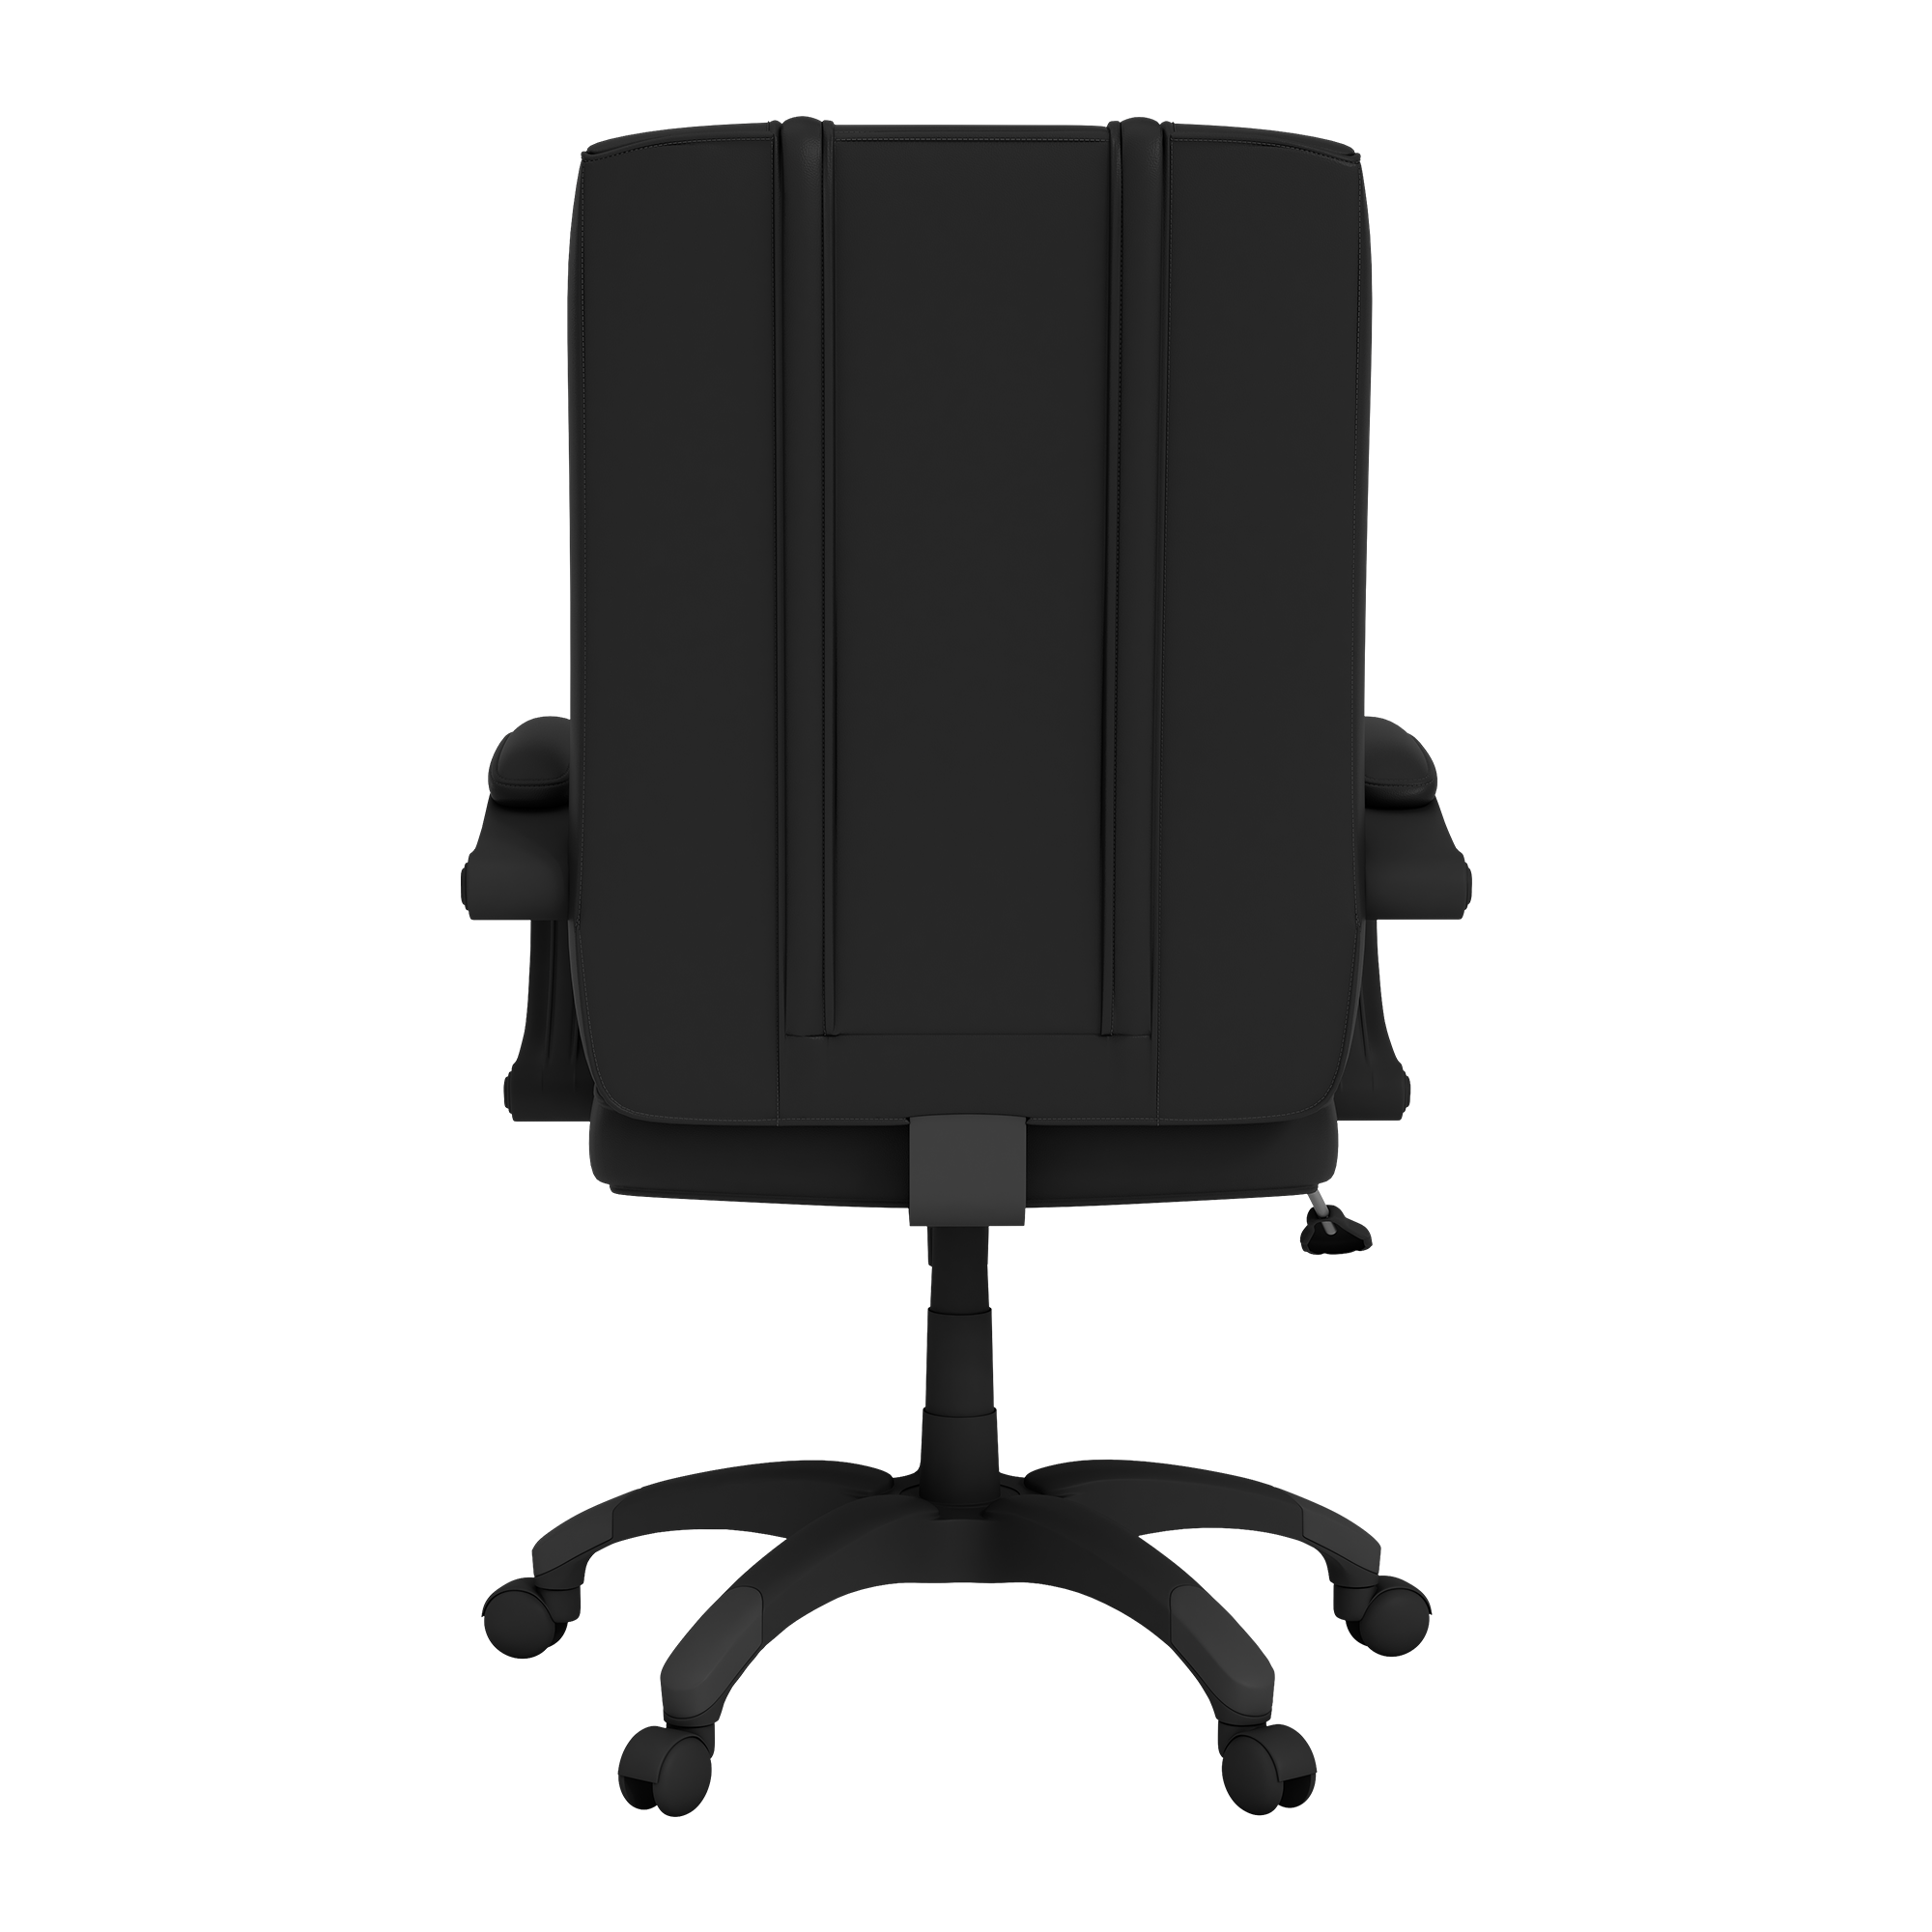 Office Chair 1000 with San Francisco Giants Cooperstown